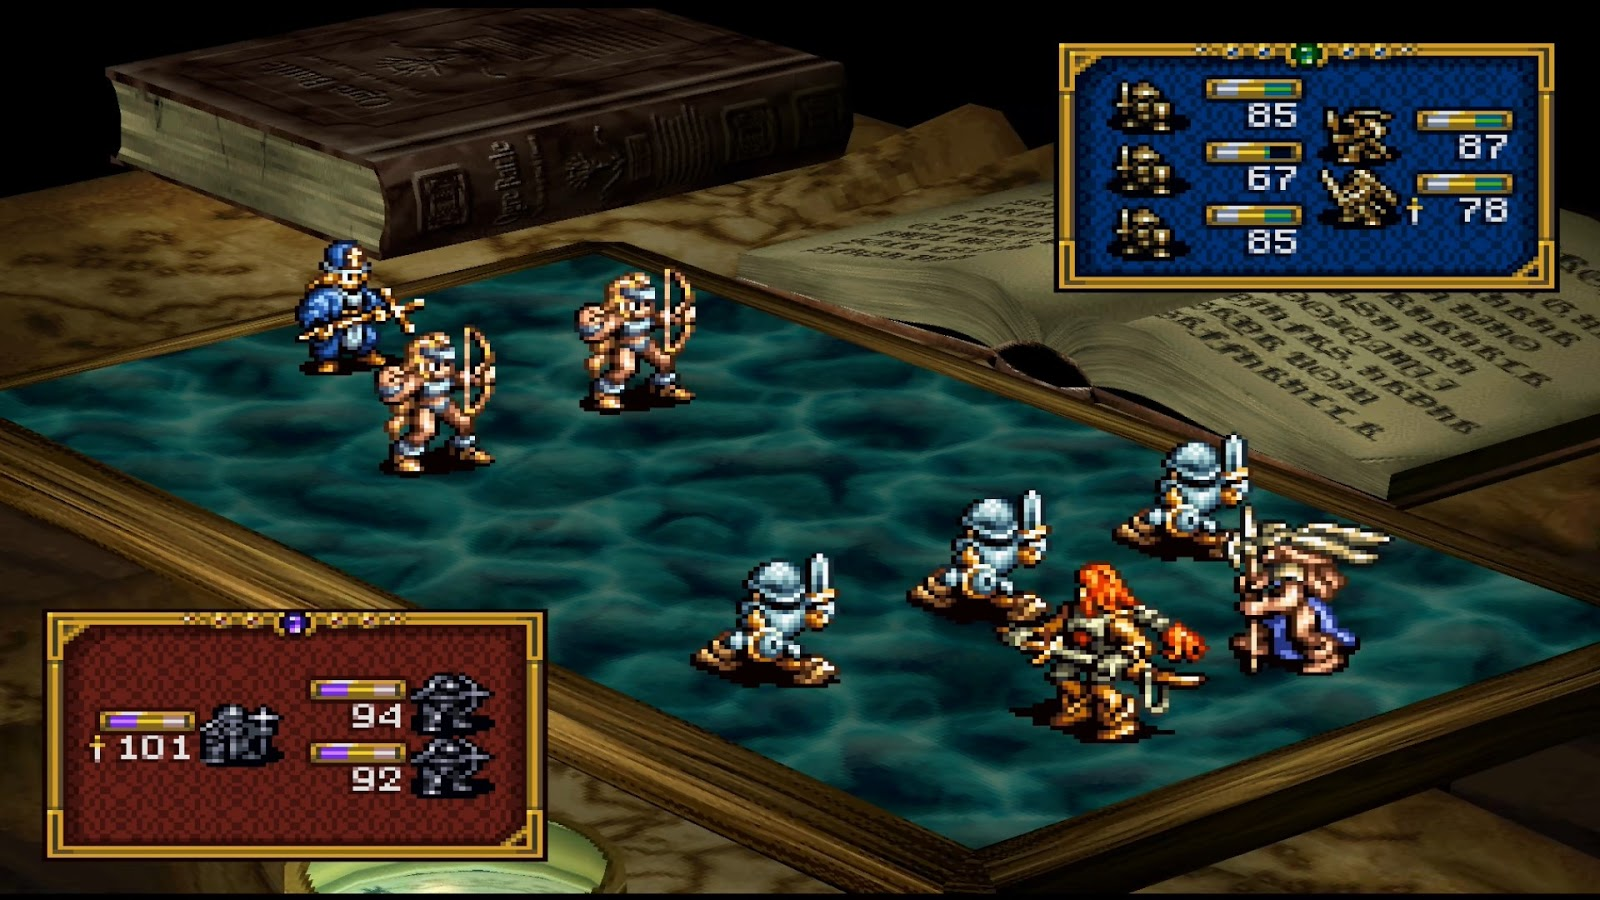 Ogre Battle 64 Person Of Lordly Caliber, ogre Battle The March Of The Black  Queen, ogre Battle, tactics Ogre Let Us Cling Together, final Fantasy  Tactics, character Class, Sega Saturn, tactical Roleplaying